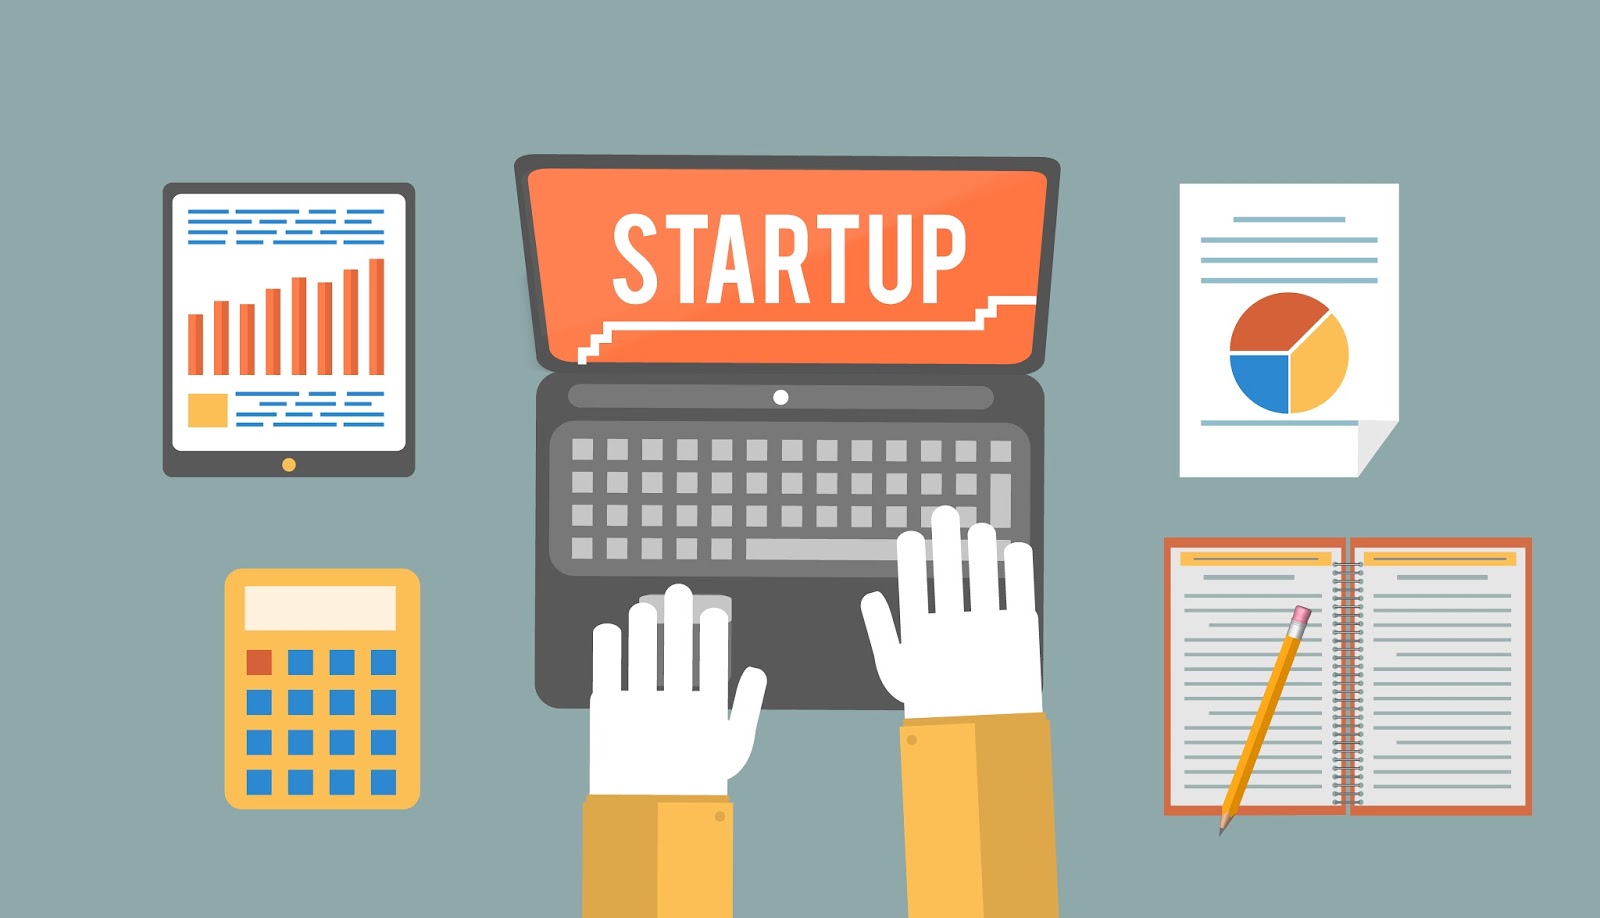 Startup Business or Idea in Pakistan